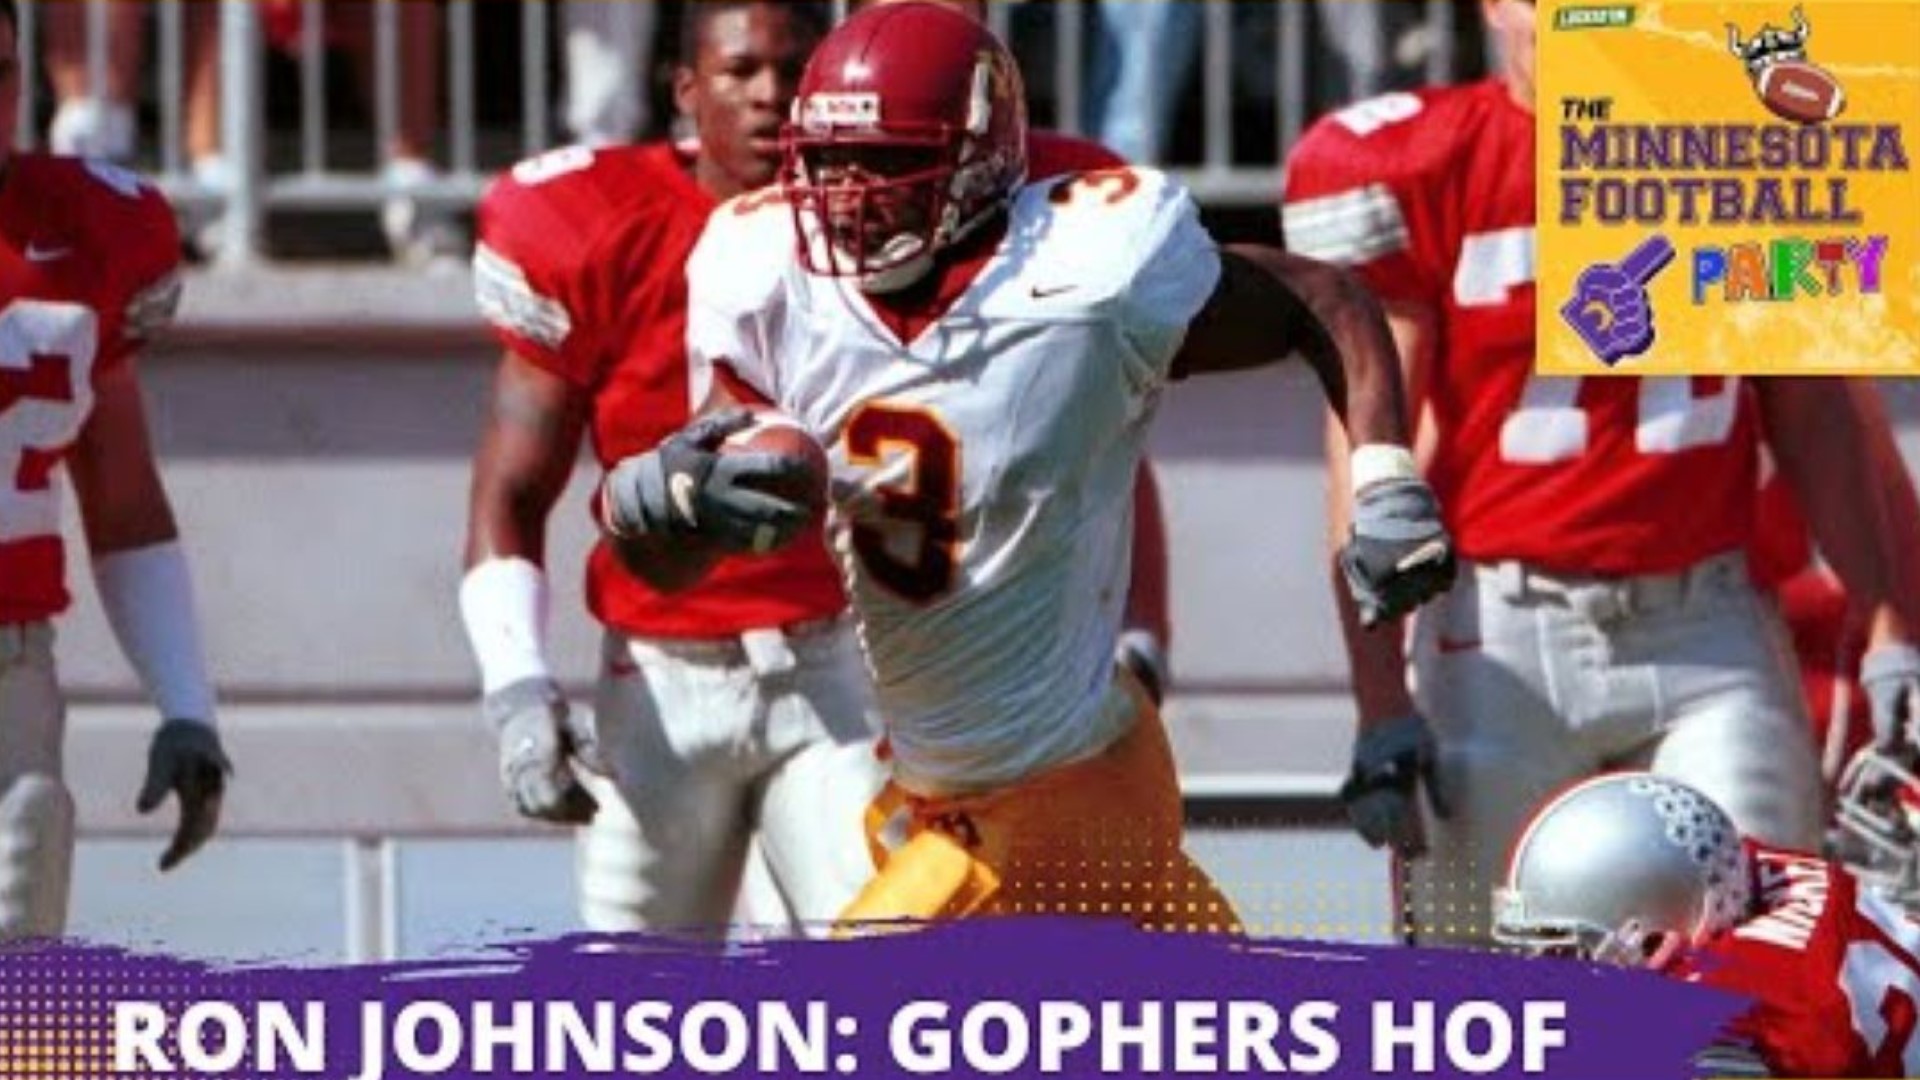 The former pass-catcher joins The Minnesota Football Party to recount his career and share his favorite stories from his time with the Gophers.